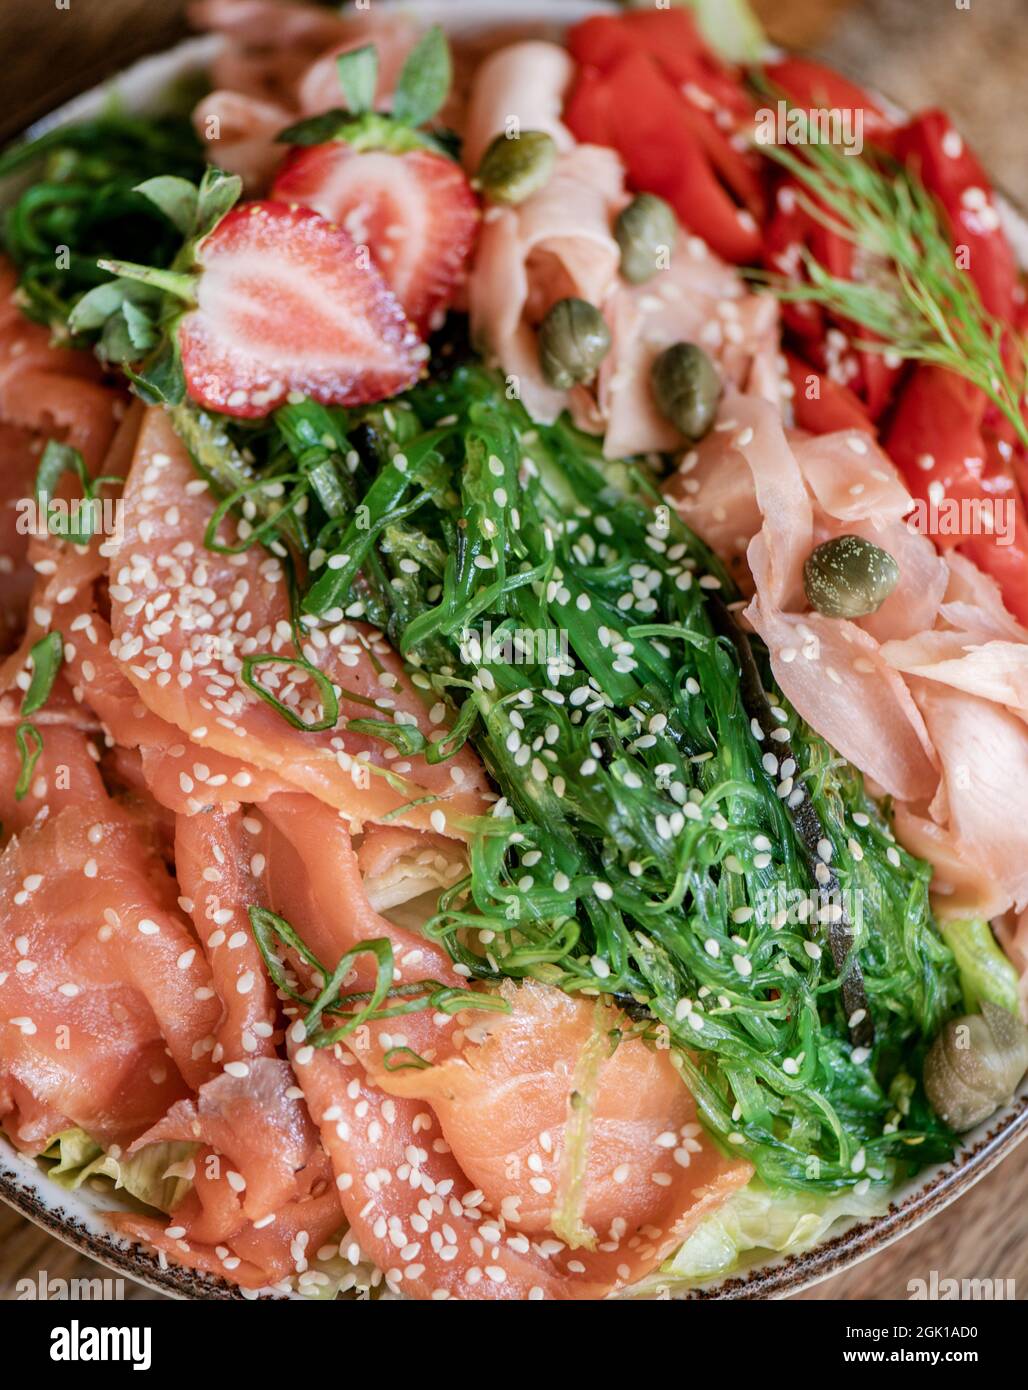 Healthy light smoked salmon, wakame and ginger bowl, close-up Stock Photo